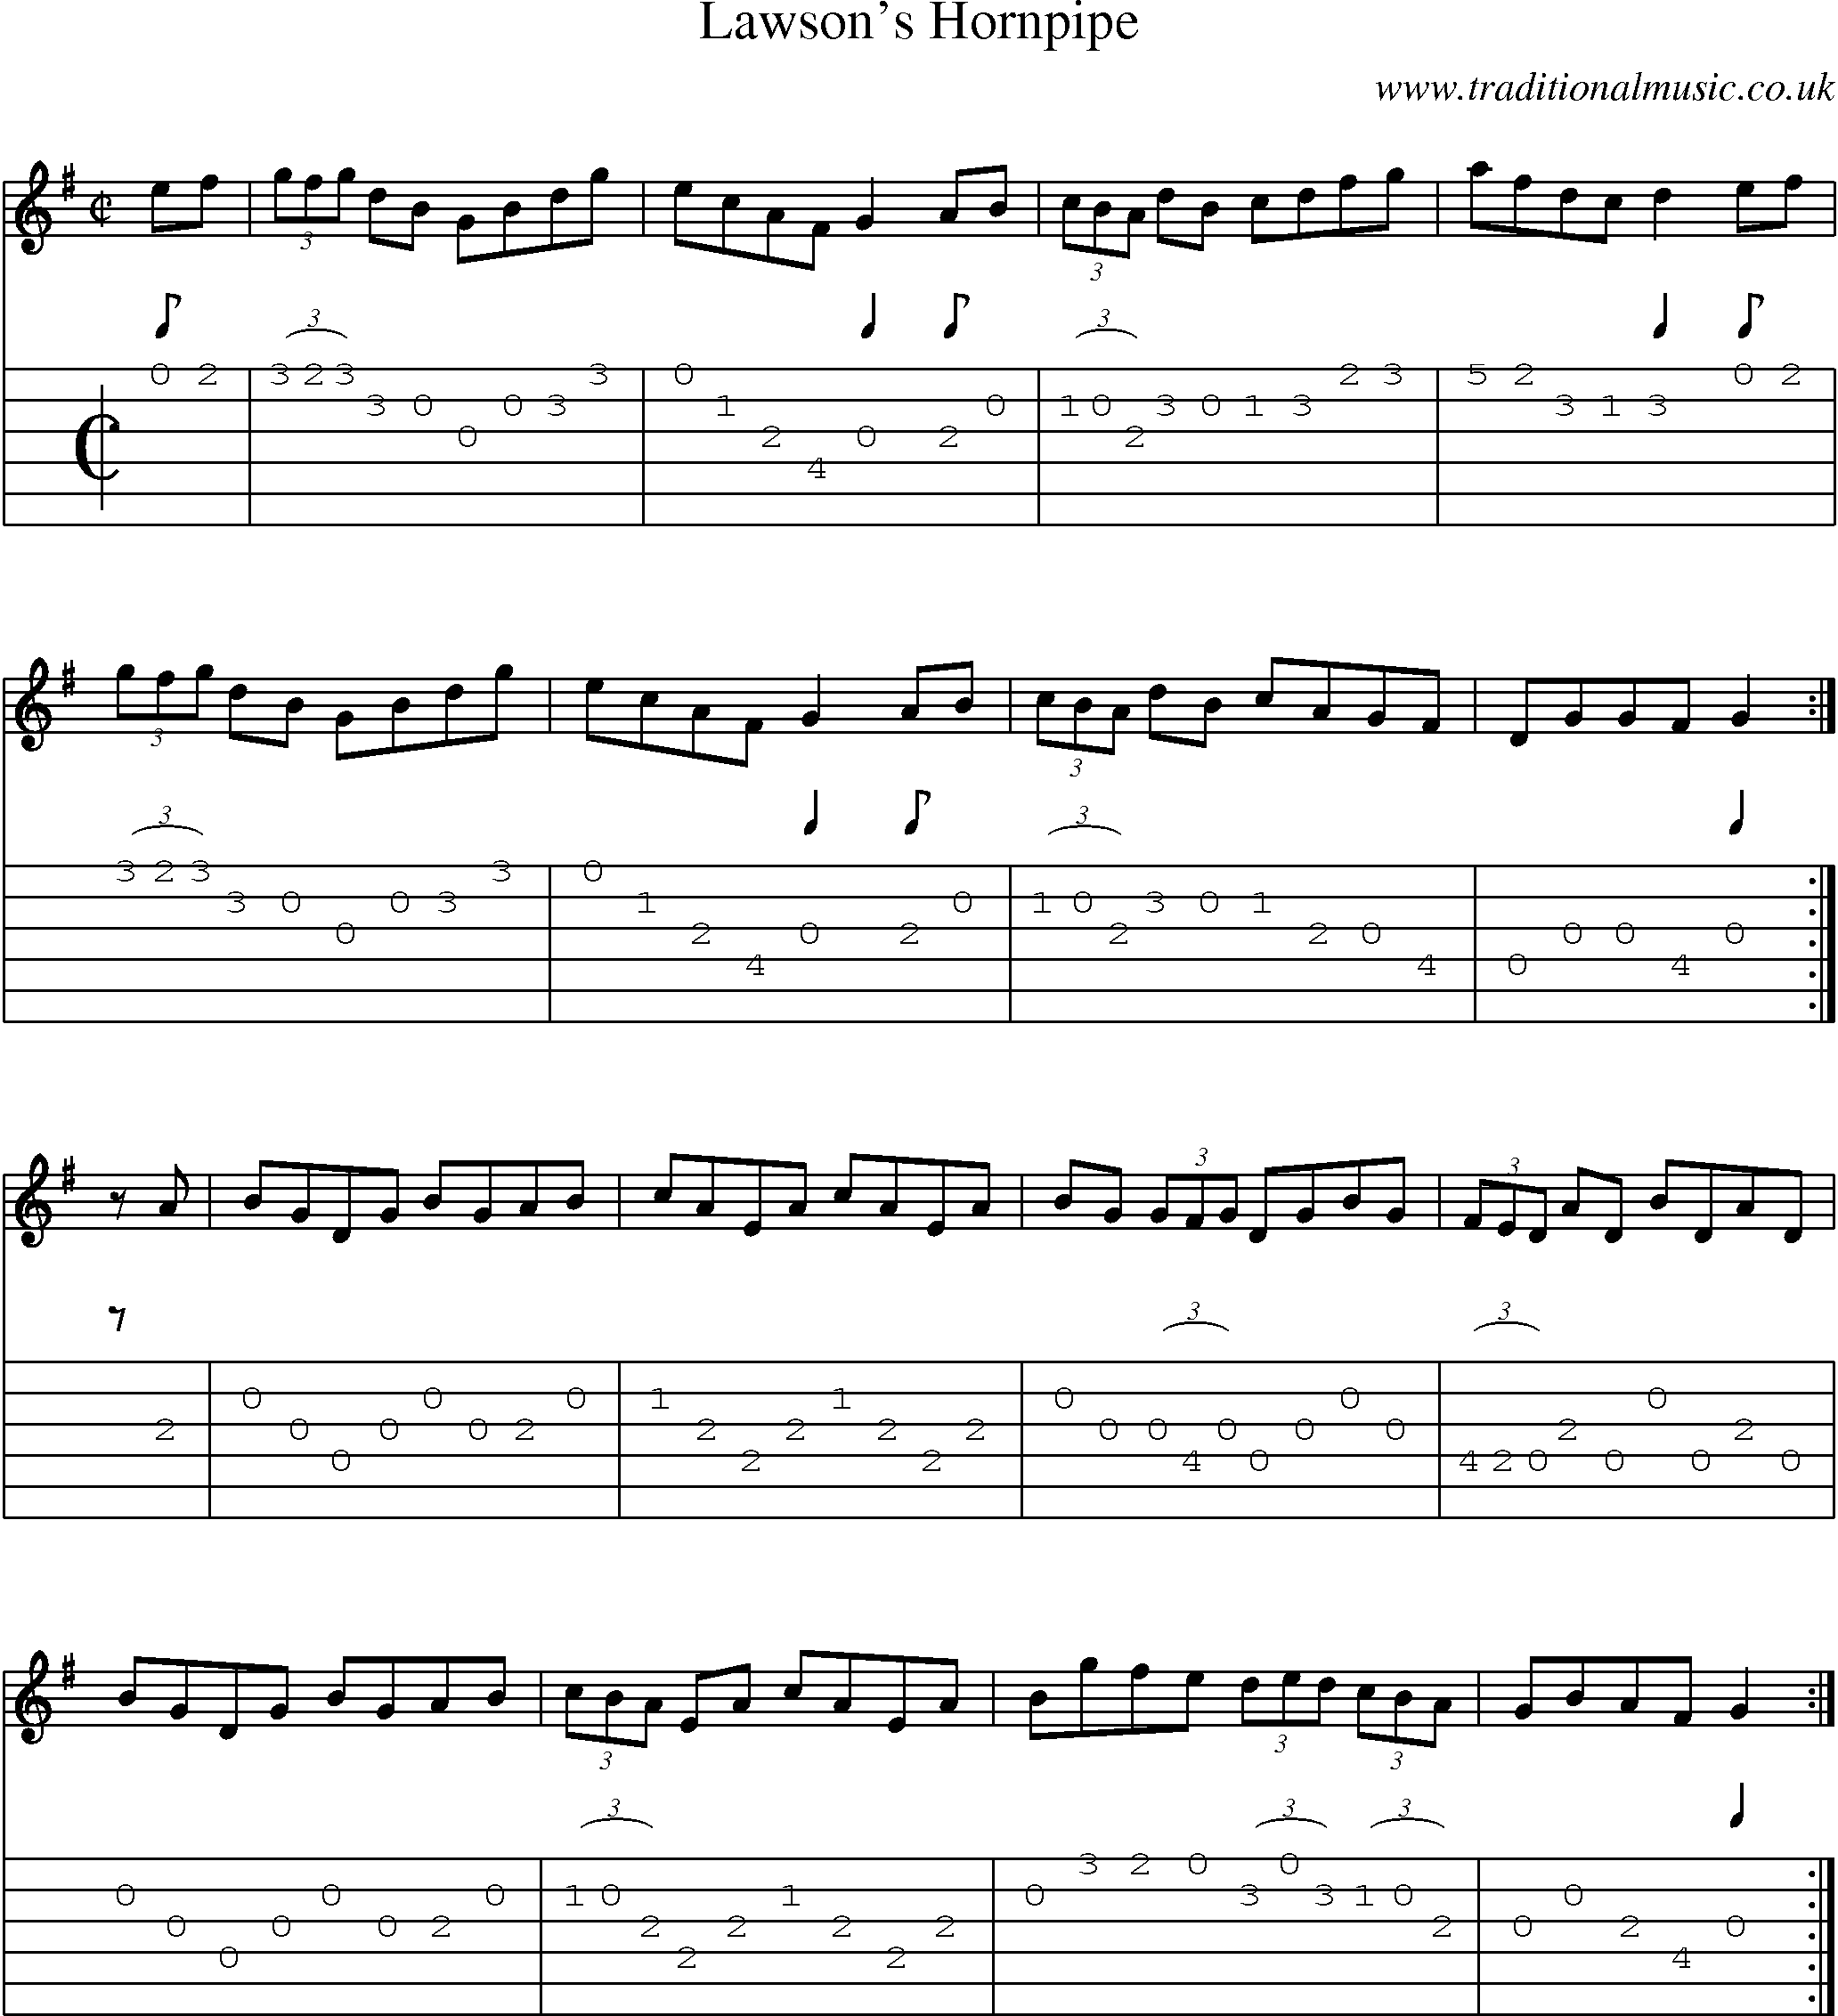 Music Score and Guitar Tabs for Lawsons Hornpipe